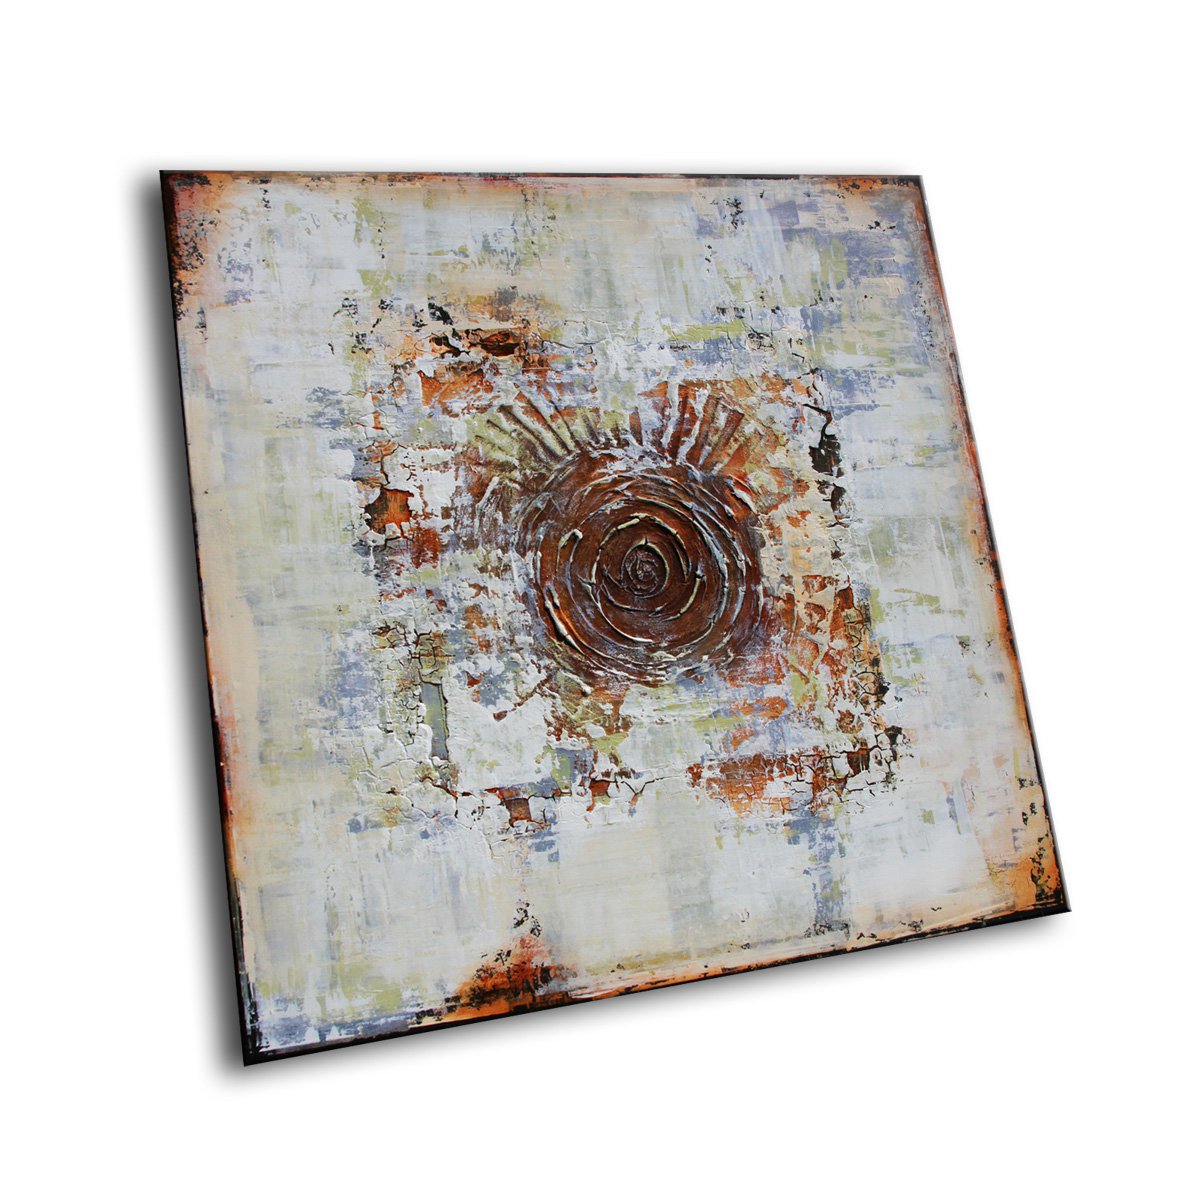 ODYSSEY - 100 x 100 CMS - TEXTURED ABSTRACT PAINTING by Inez Froehlich